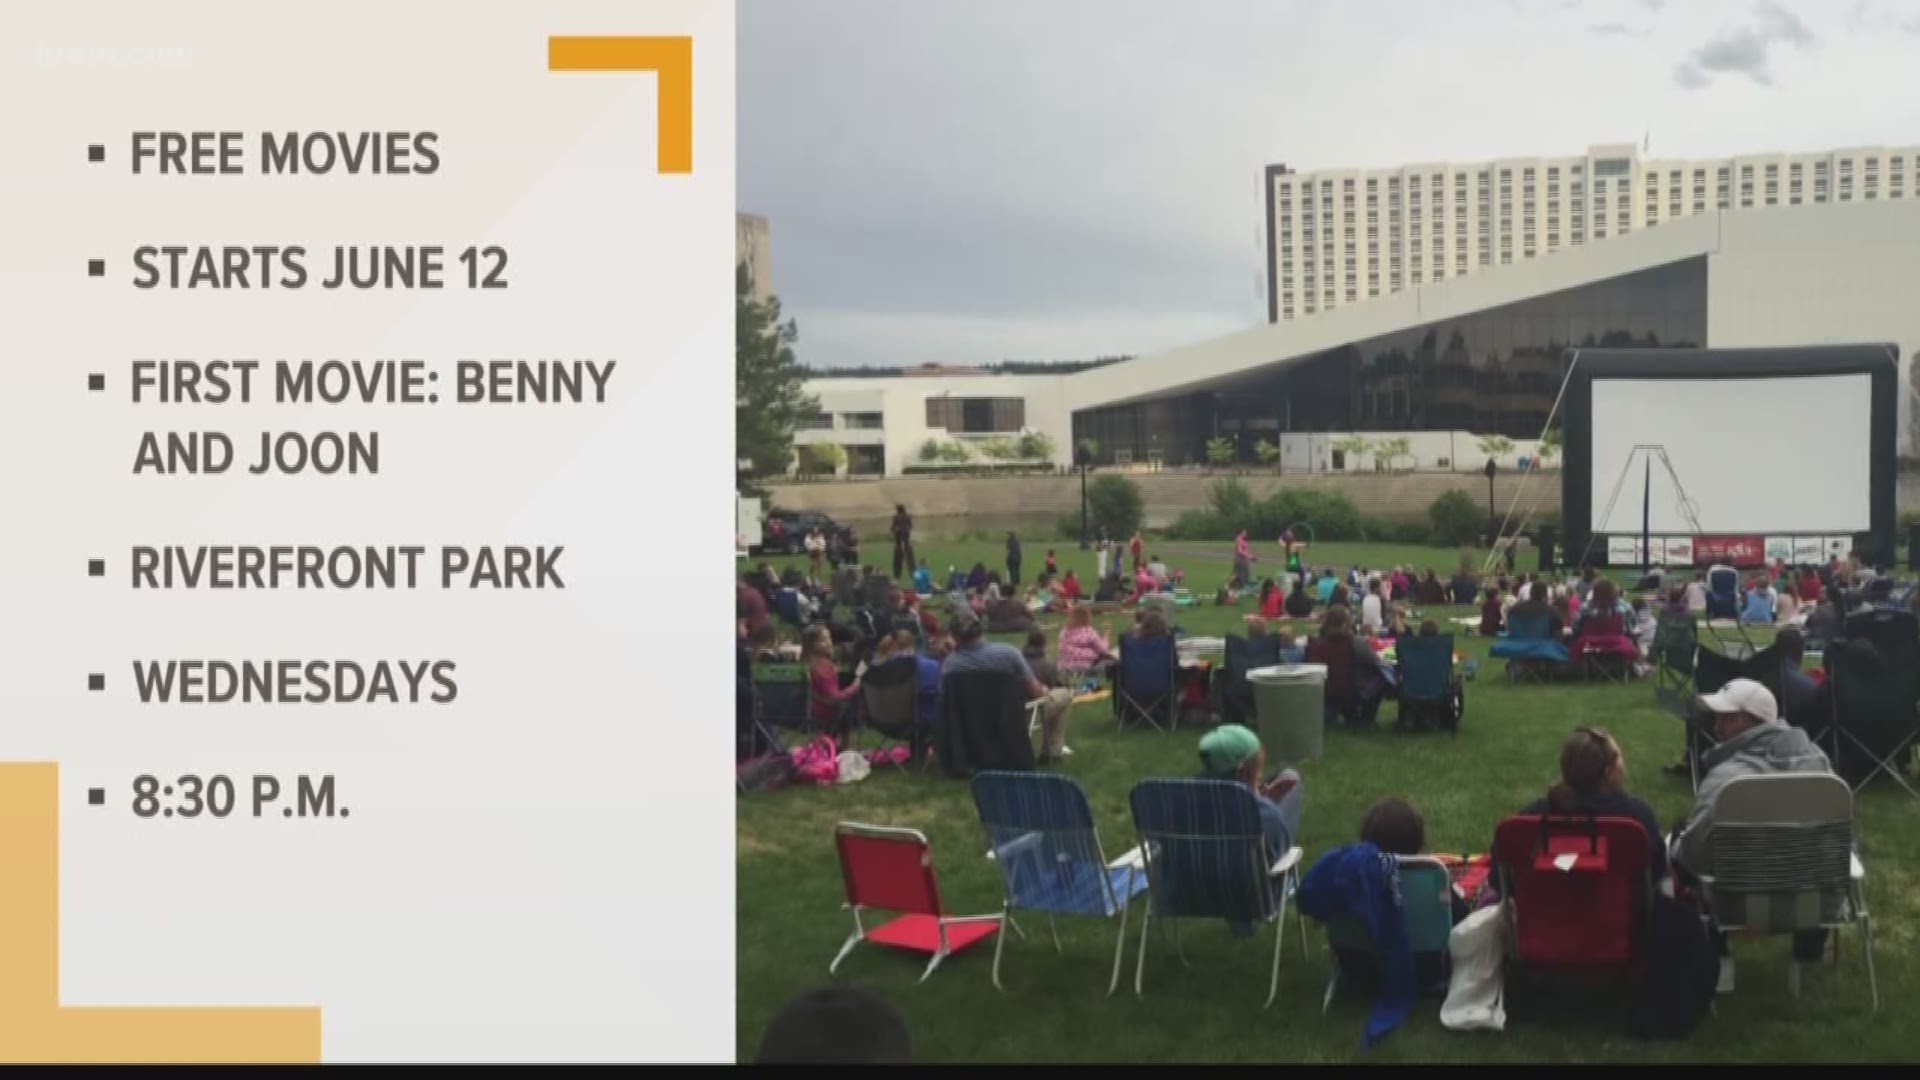 Free outdoor movies will return to Riverfront Park this summer